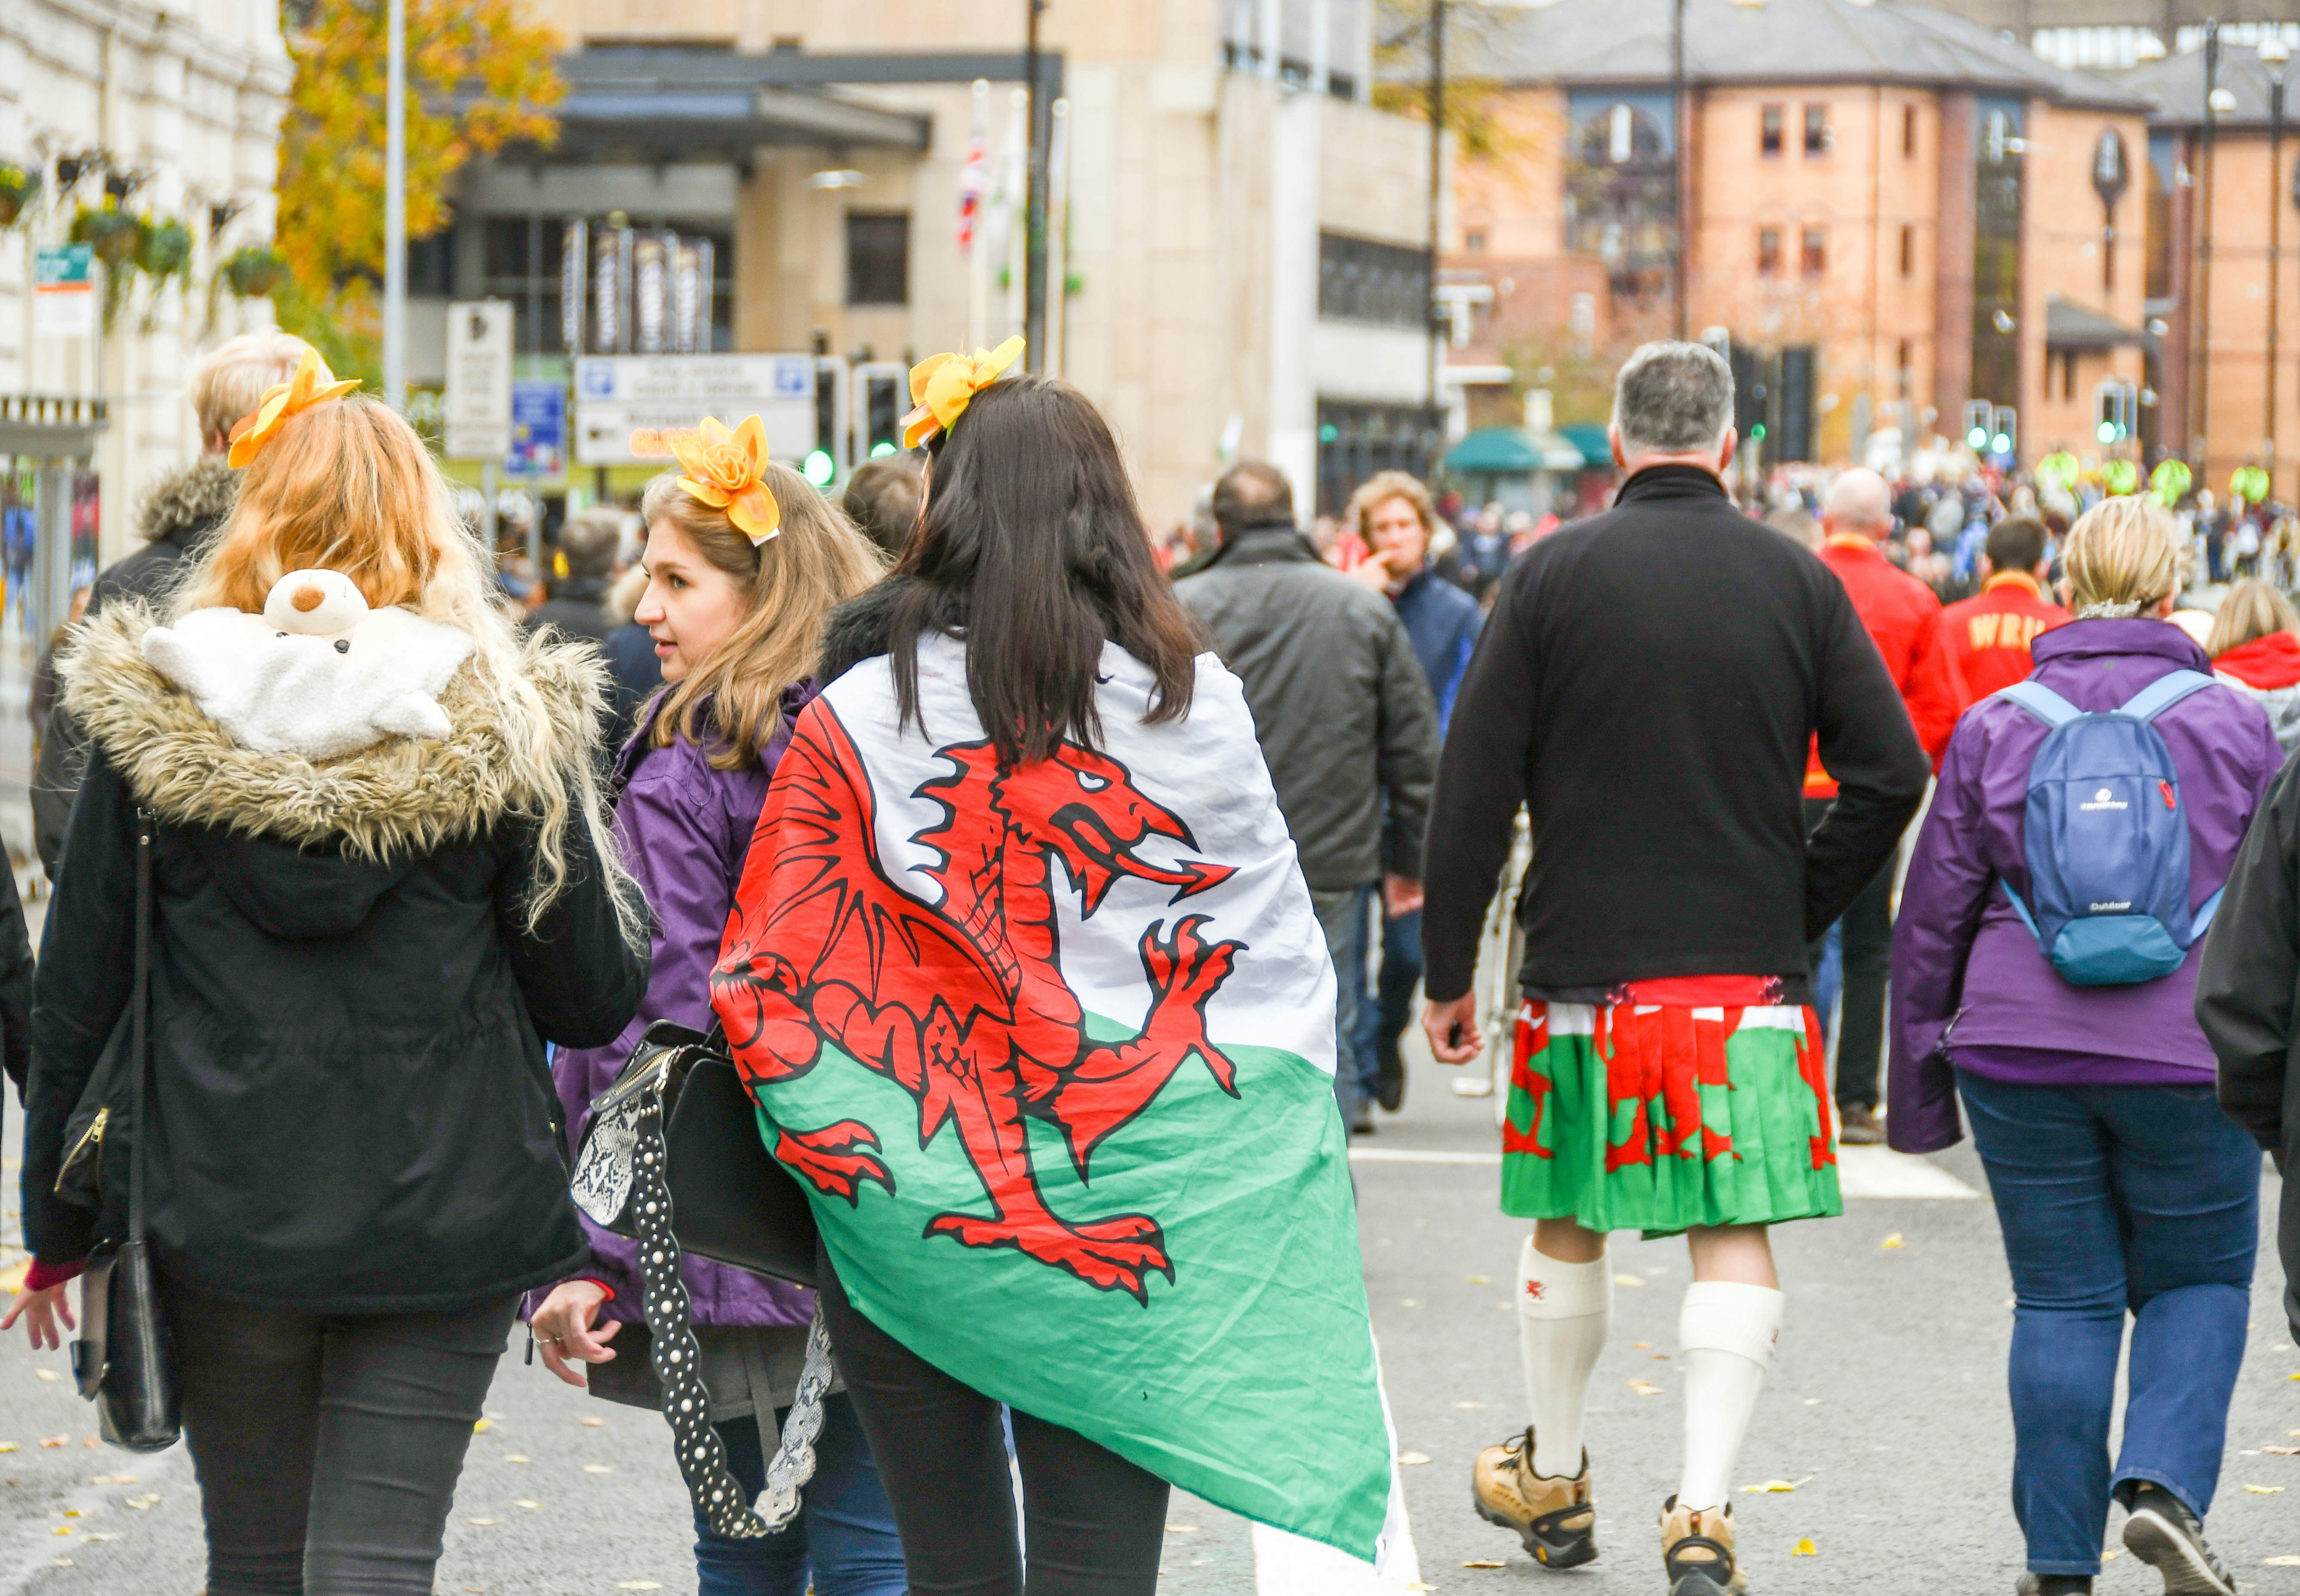 Welsh rugby supporters draped in flags in Cardiff city centre on the day of an international rugby match